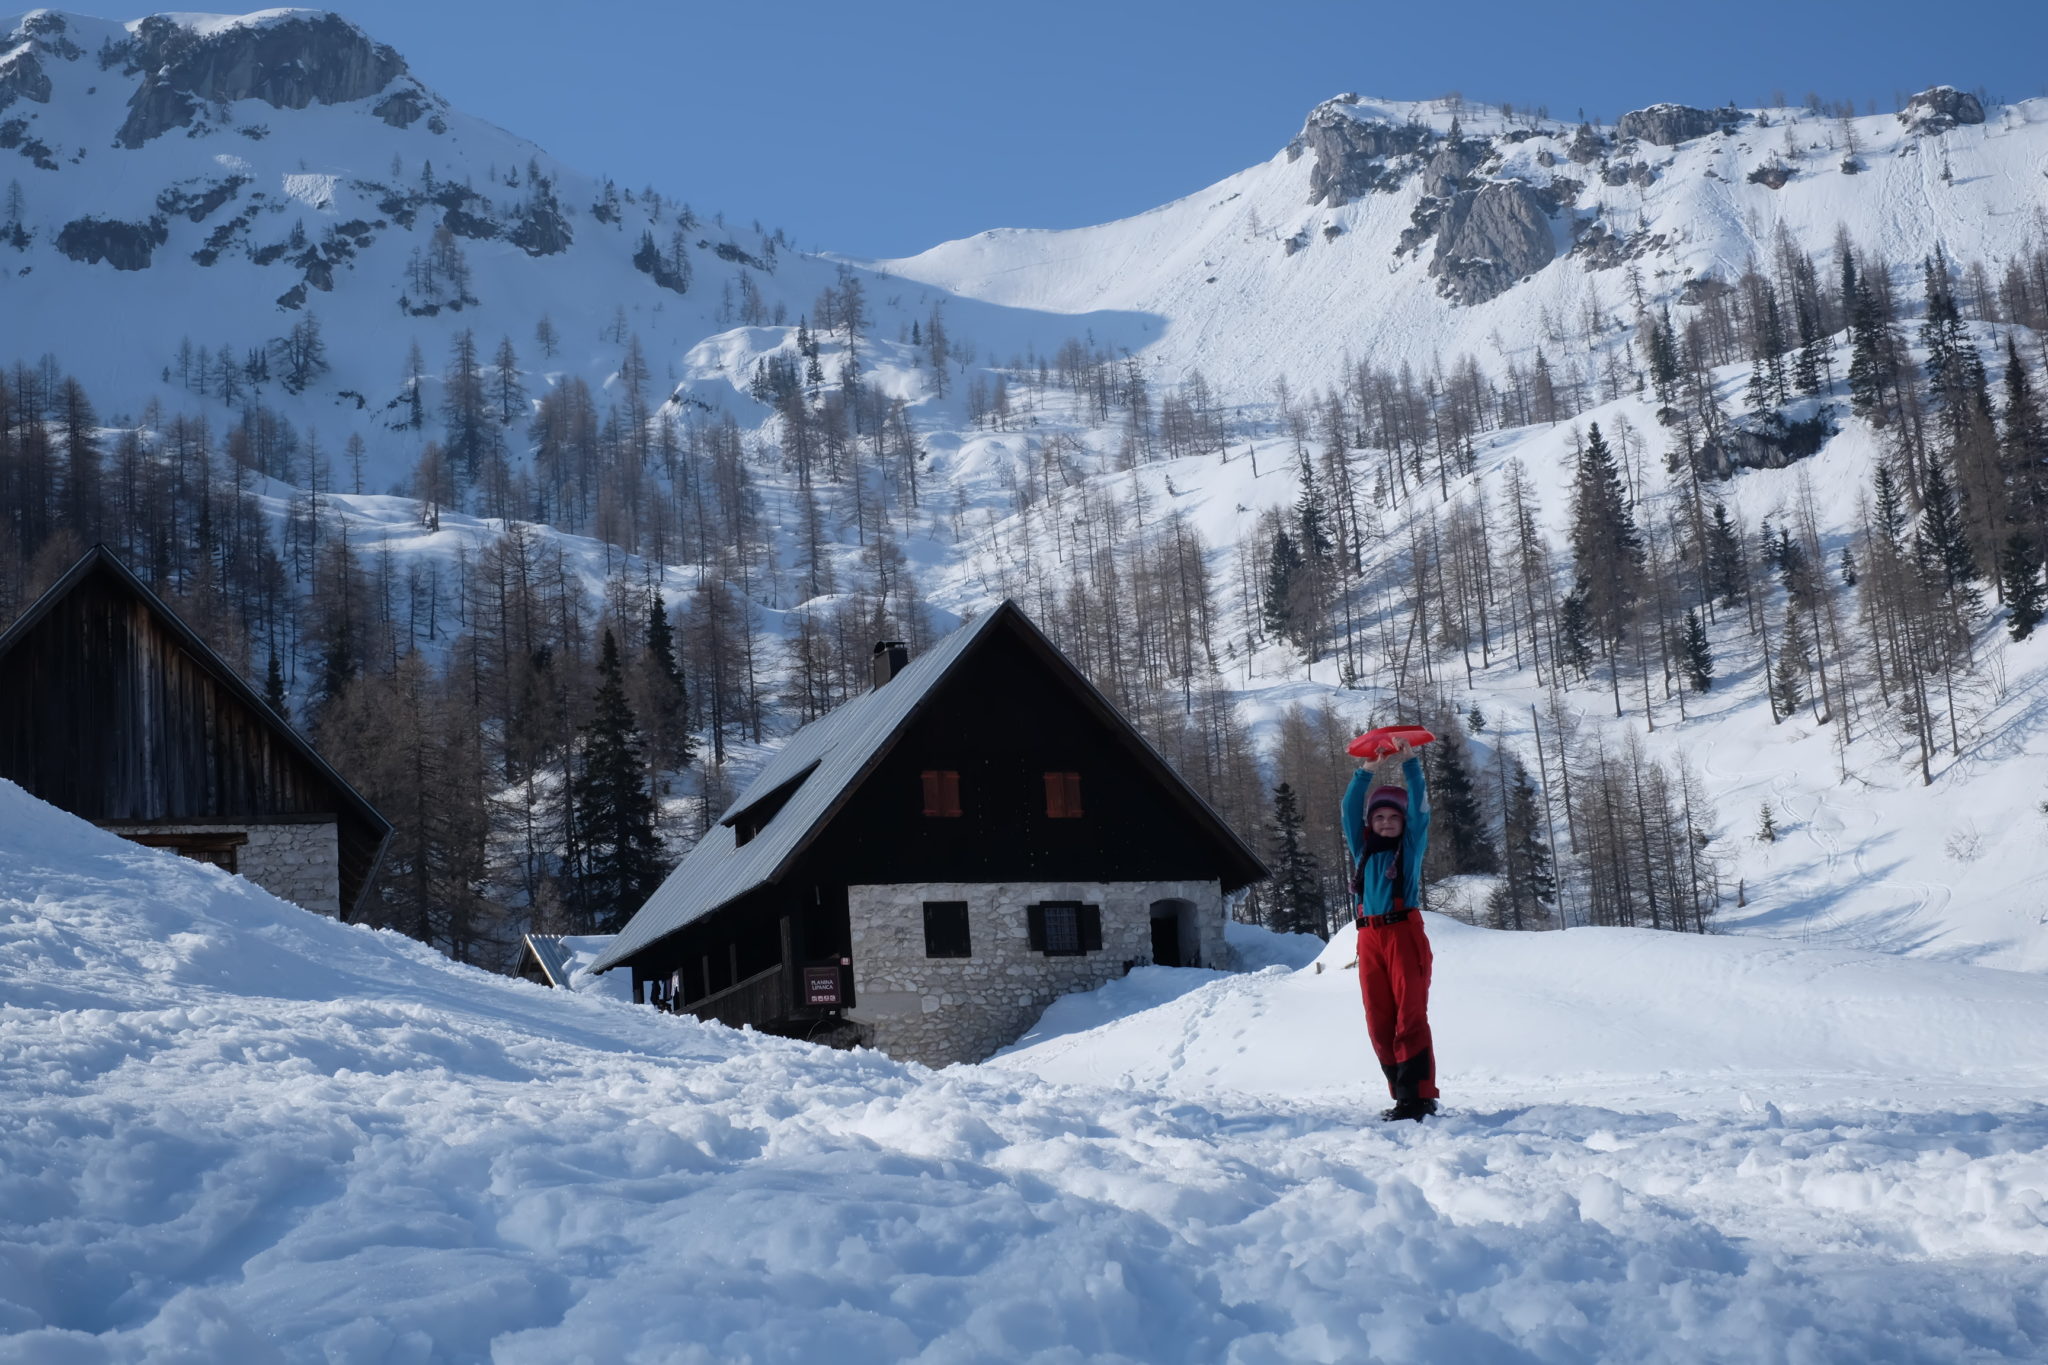 Our six-and-a-half year old daughter walked for 7 hours in knee-deep powder snow to the Blejska Hut, 1,630 m or 5,350 Ft, and back since the local road to the usual starting point was closed. Photo by: Exploring Slovenia.